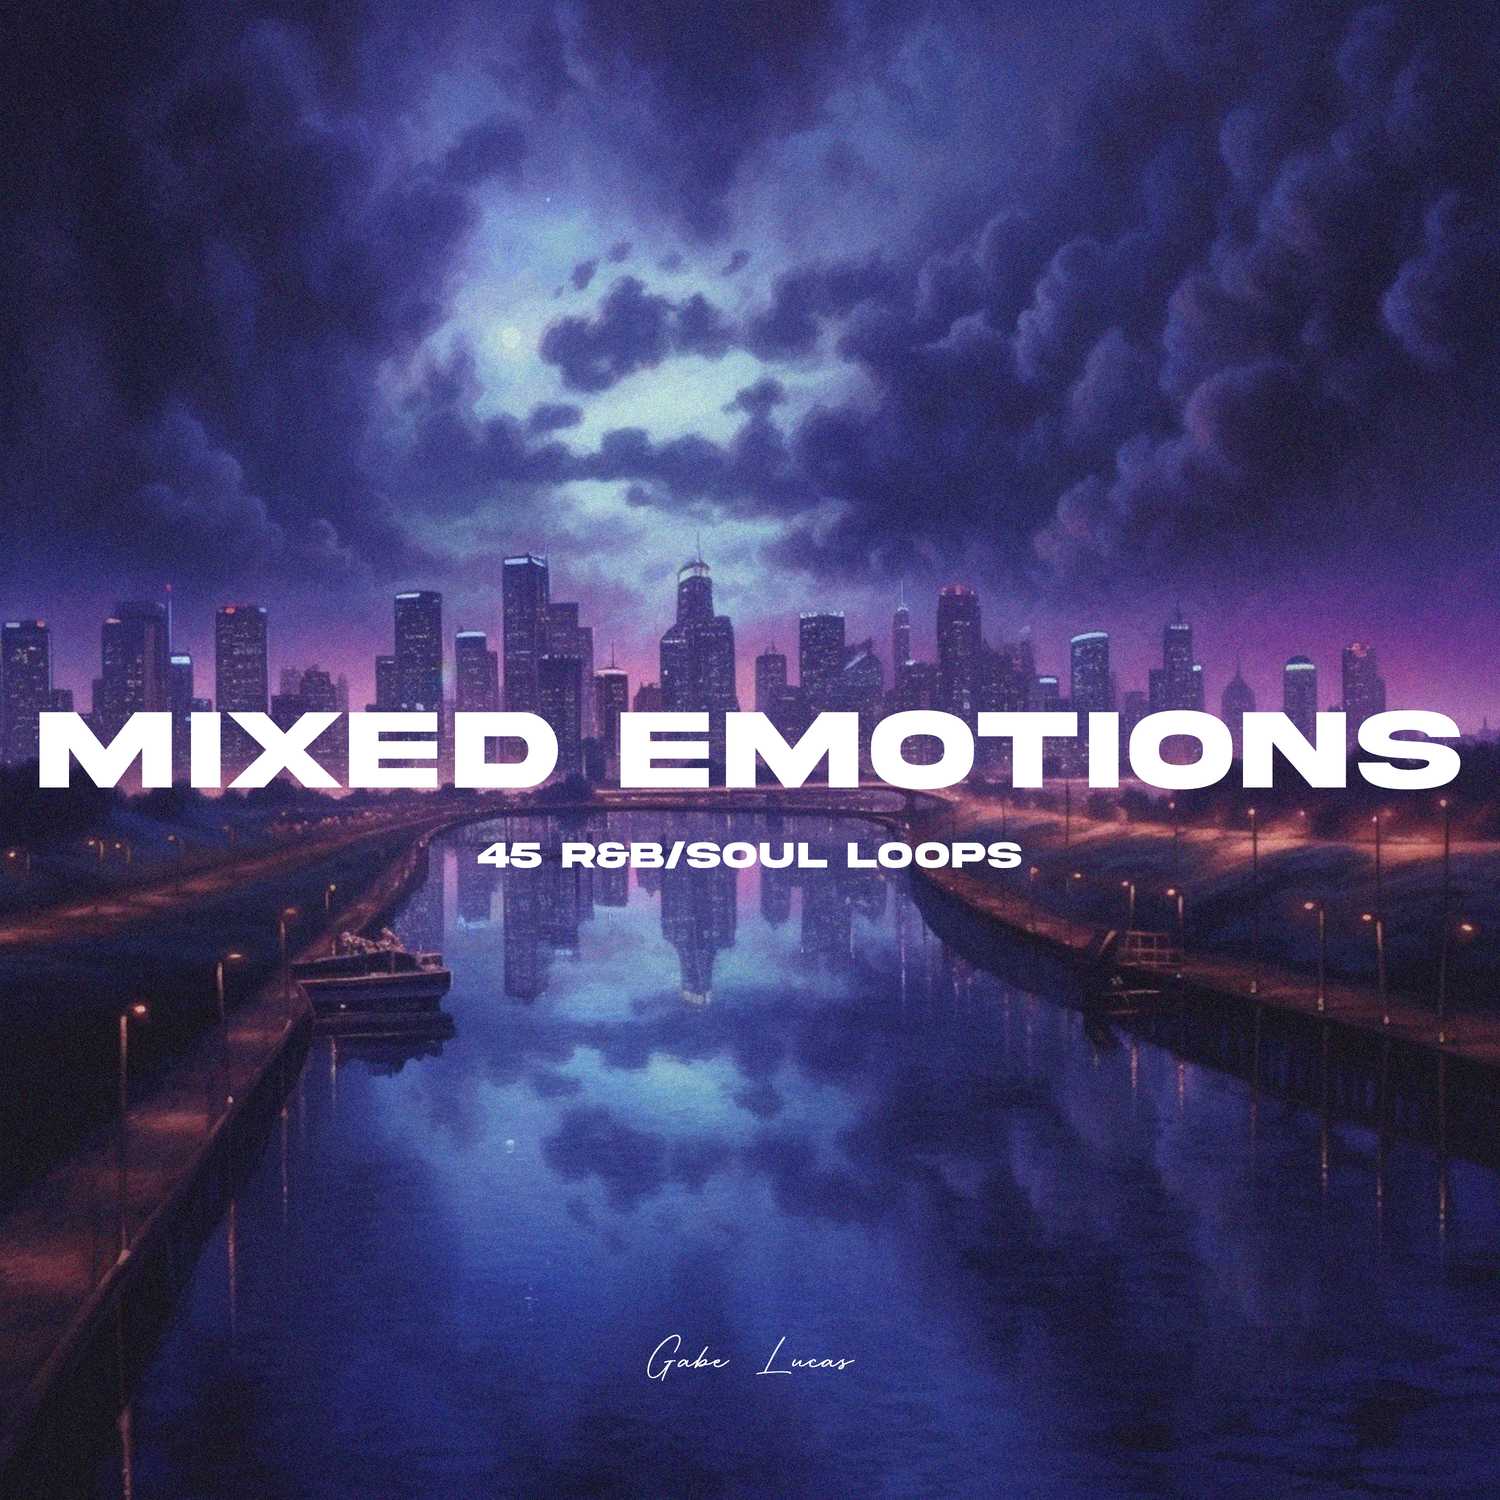 🎹 Gabe Lucas - Mixed Emotions